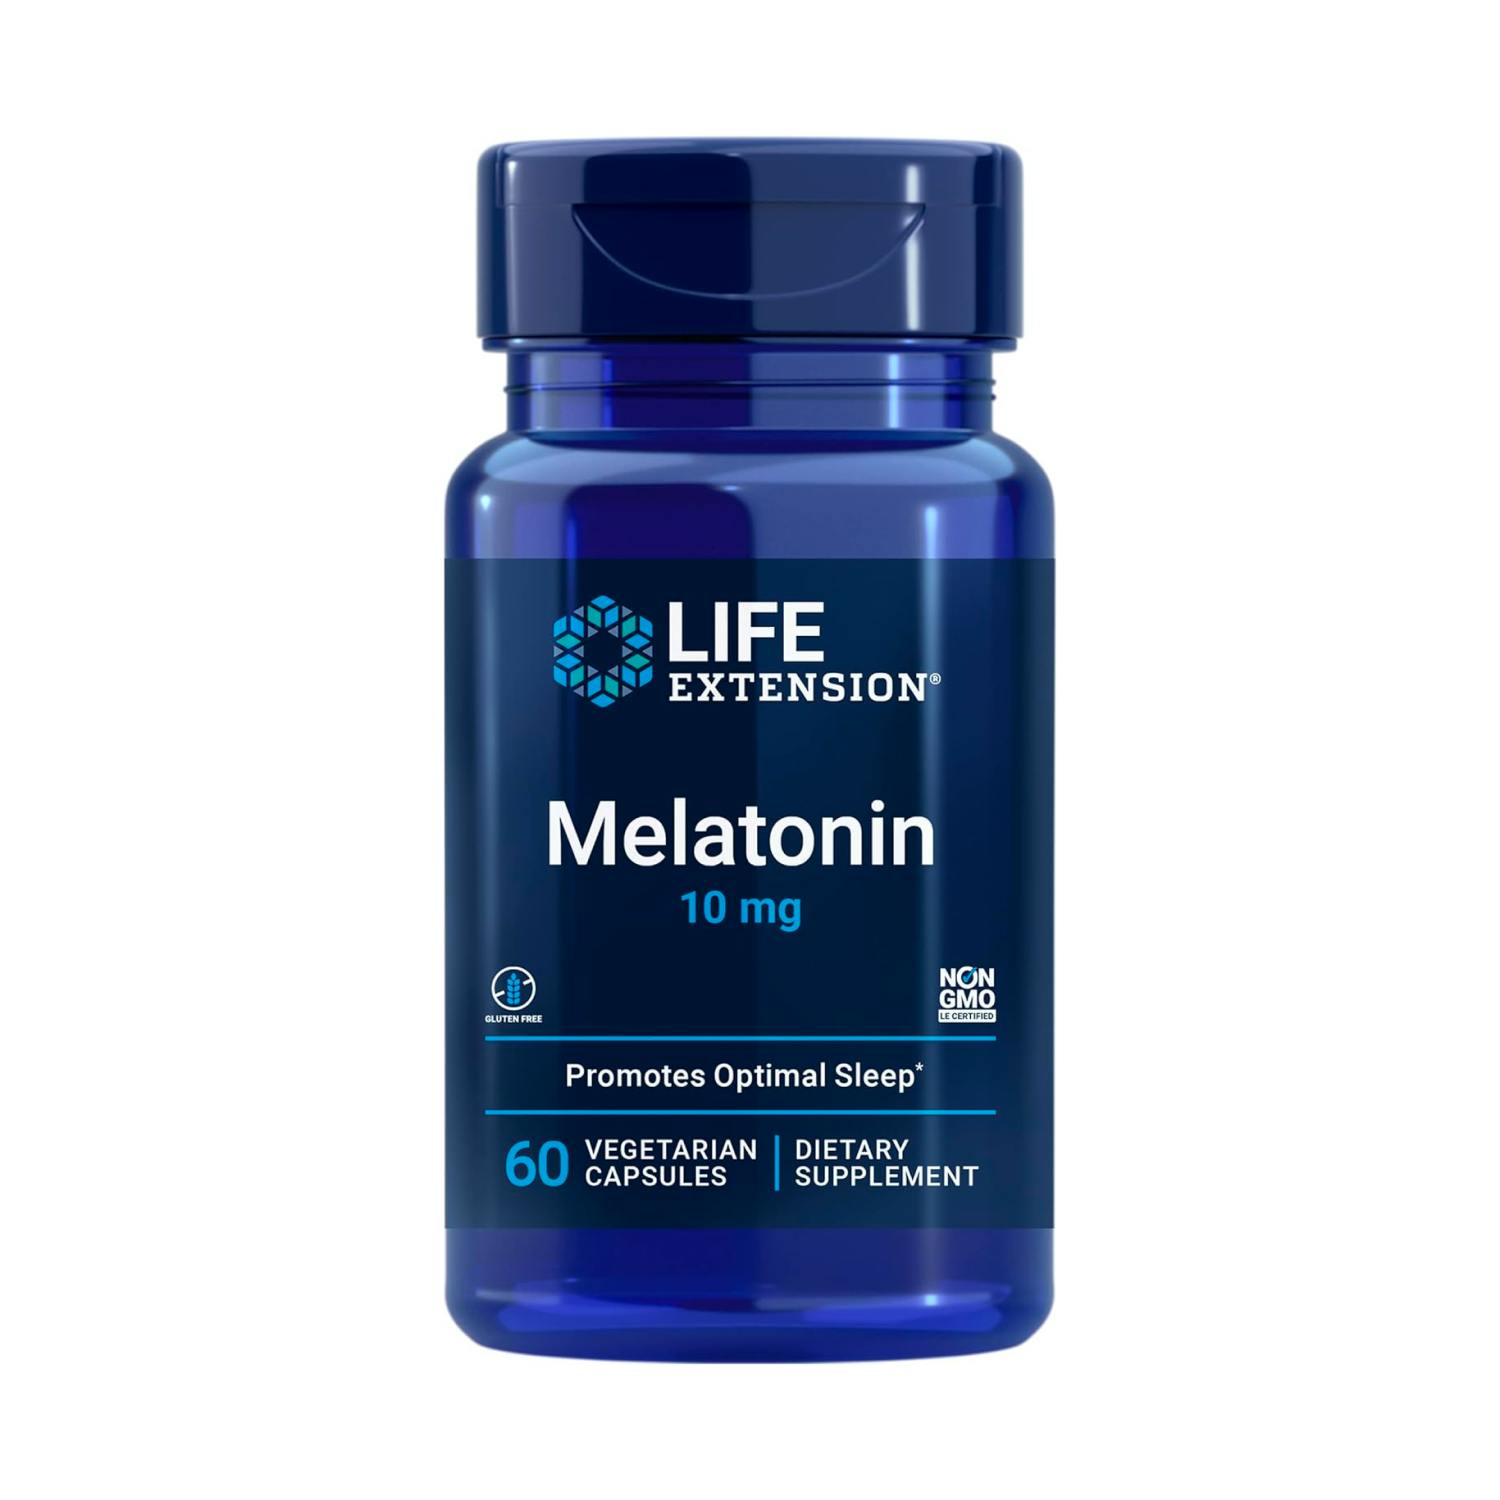 Life Extension Melatonin, 10 mg, Healthy Dose, Our Highest Available Dosage, for Sleep Support, Healthy Immune Response, Oxidative Stress Defense, Vegetarian, 60 Capsules